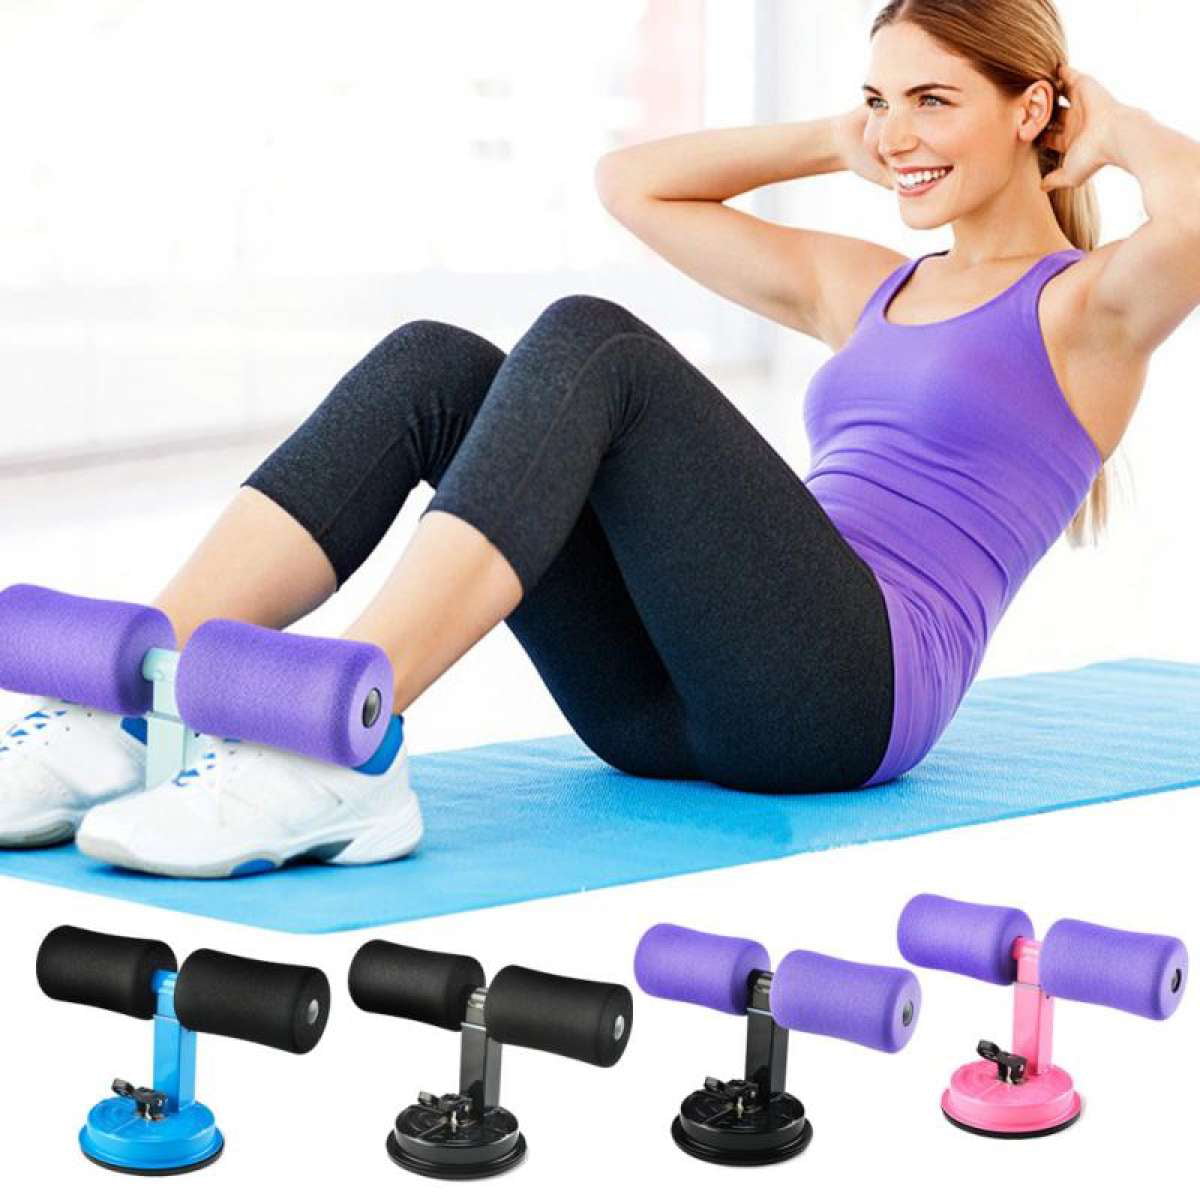 Sit Up Bar Assistant Gym Exercise Workout Equipment Fitness for Home Abdominal